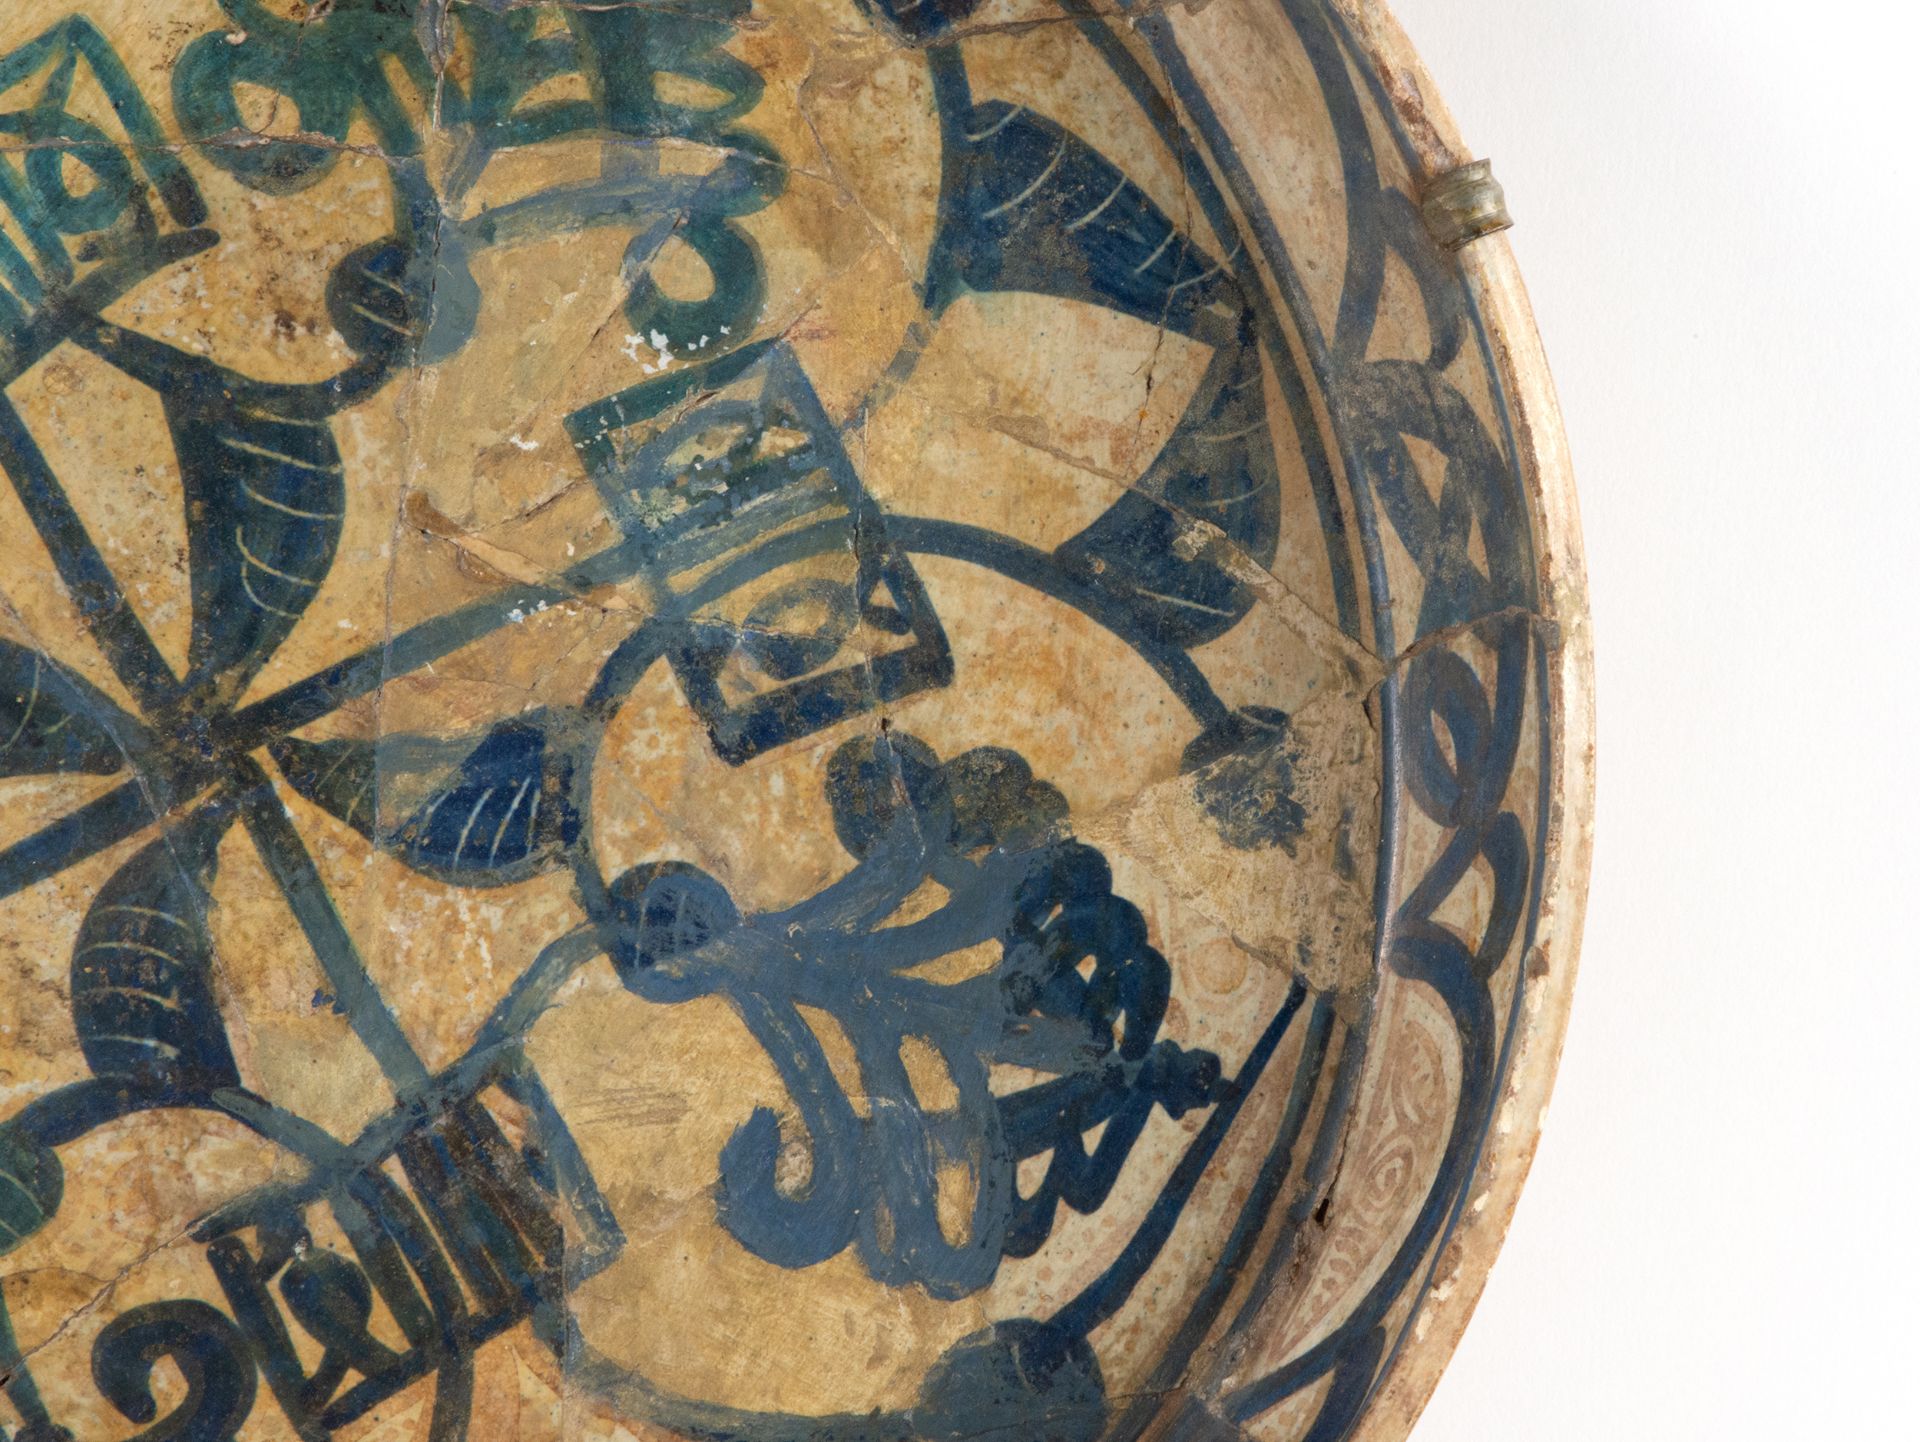 Plate in blue enamel and reflections of Hispano-Arab copper, 15th - 16th centuries - Image 5 of 6